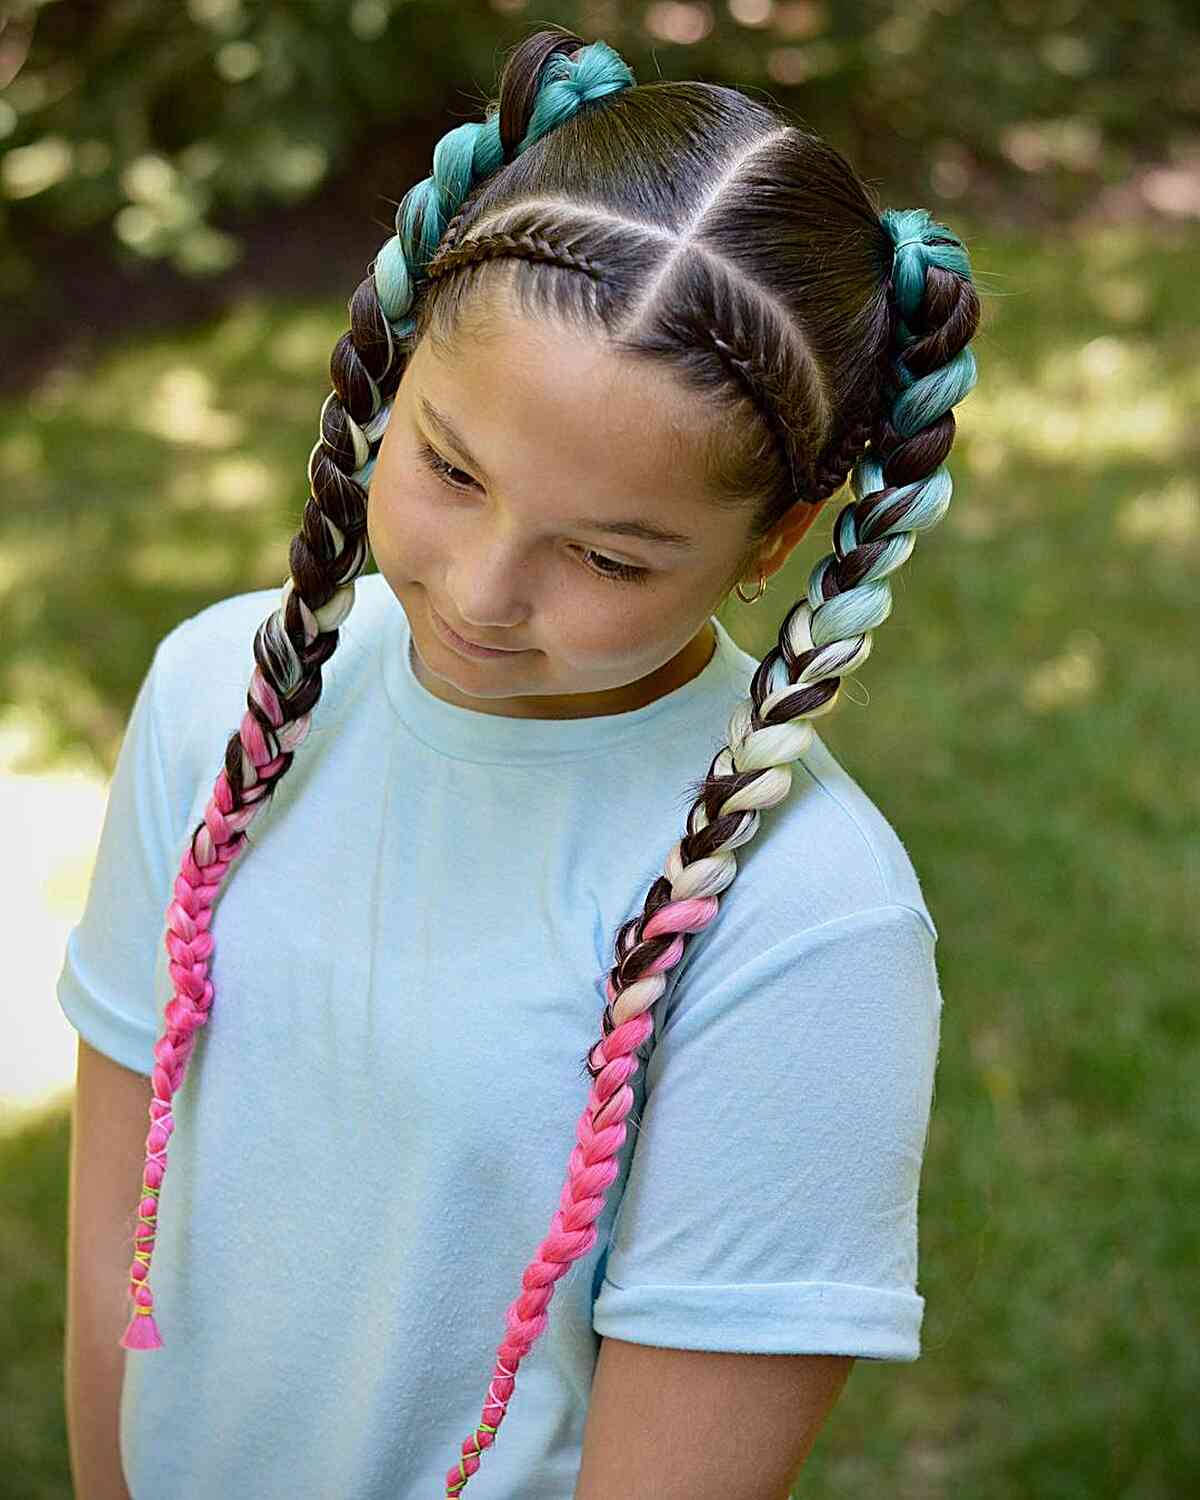 Different Pigtails Softball Hairstyle with Long Colored Braids